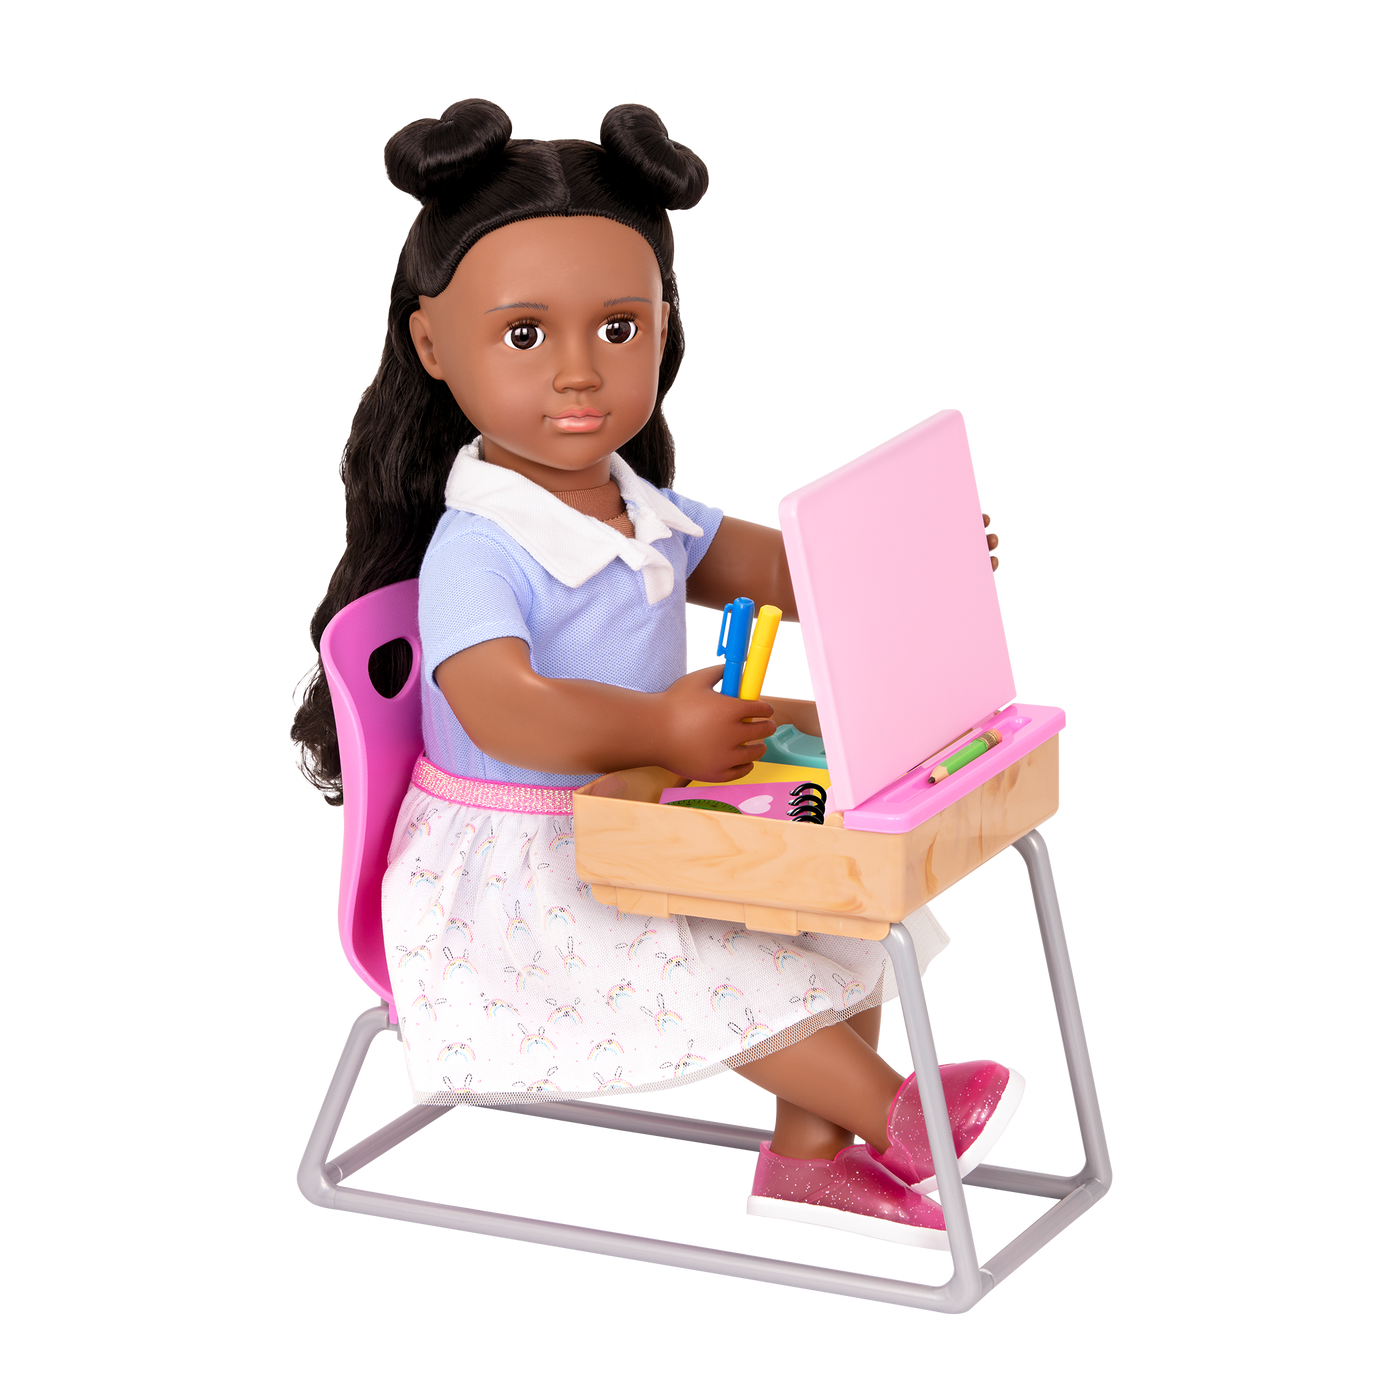 18-inch doll with student desk playset